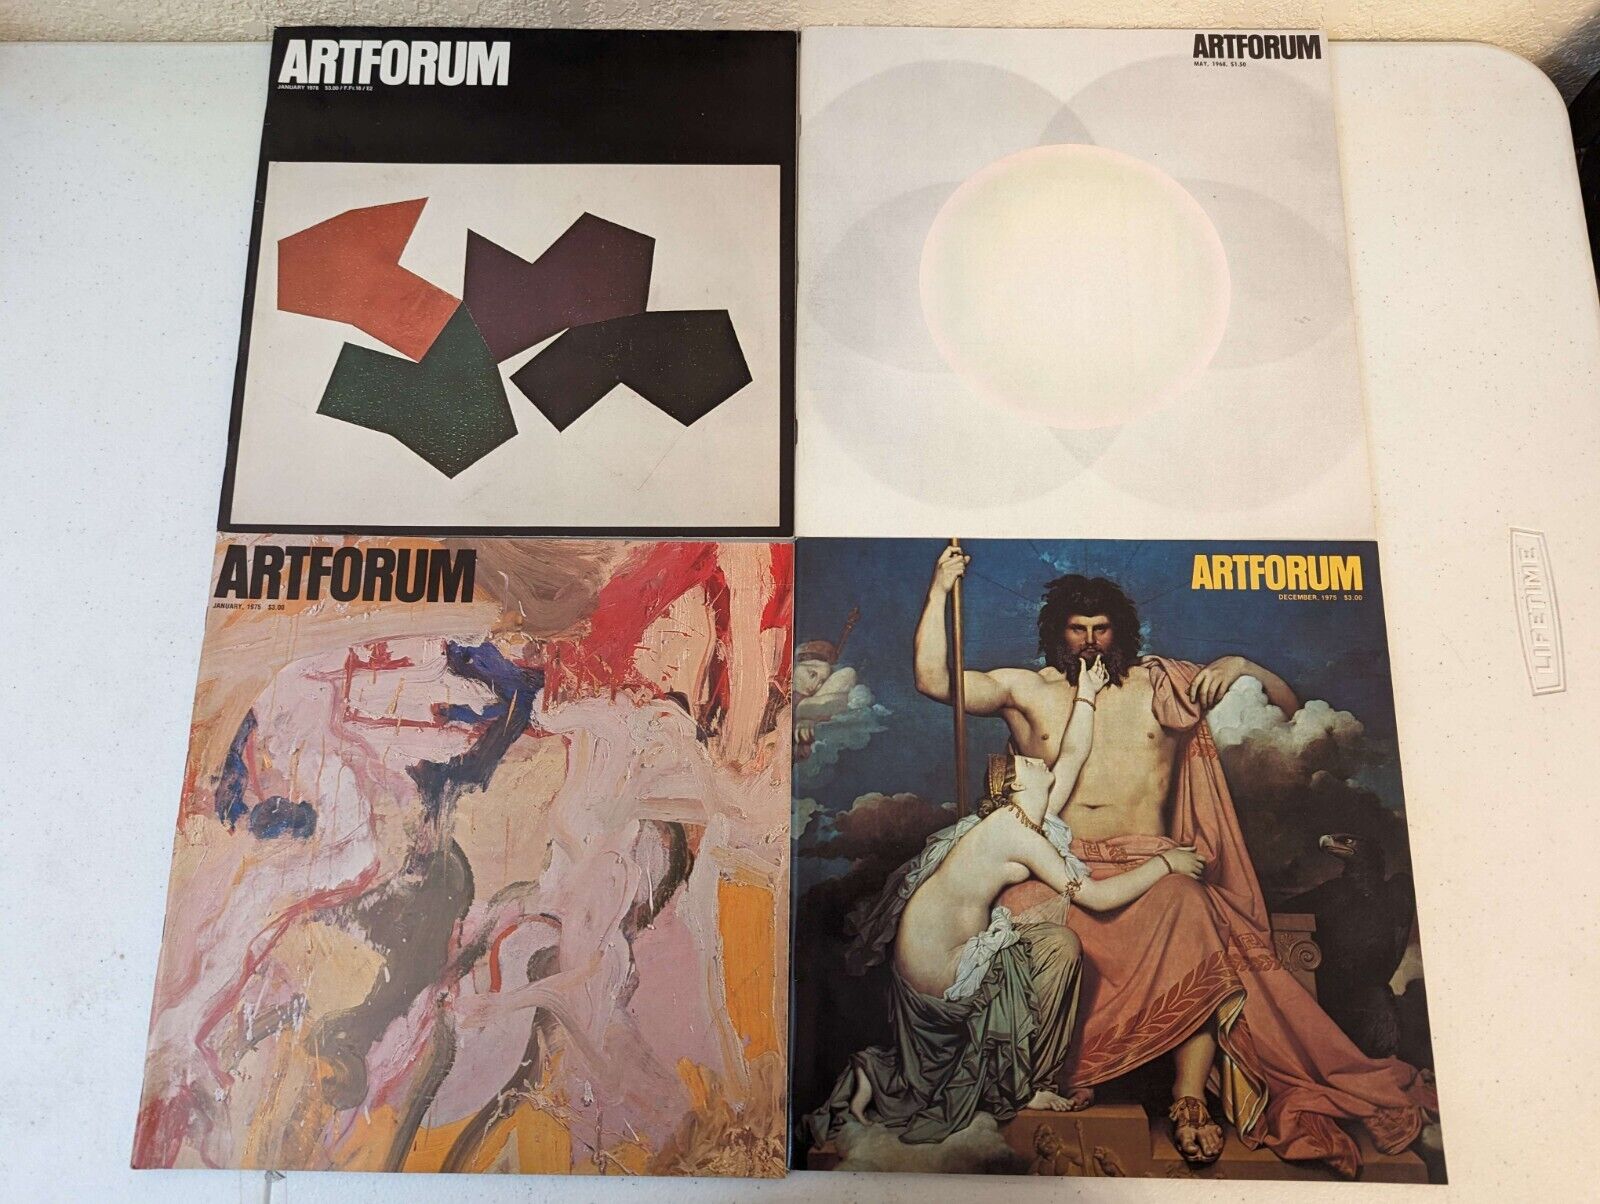 Vintage Artforum magazine lot of 22 Issues. Years Ranging from 1965-1975